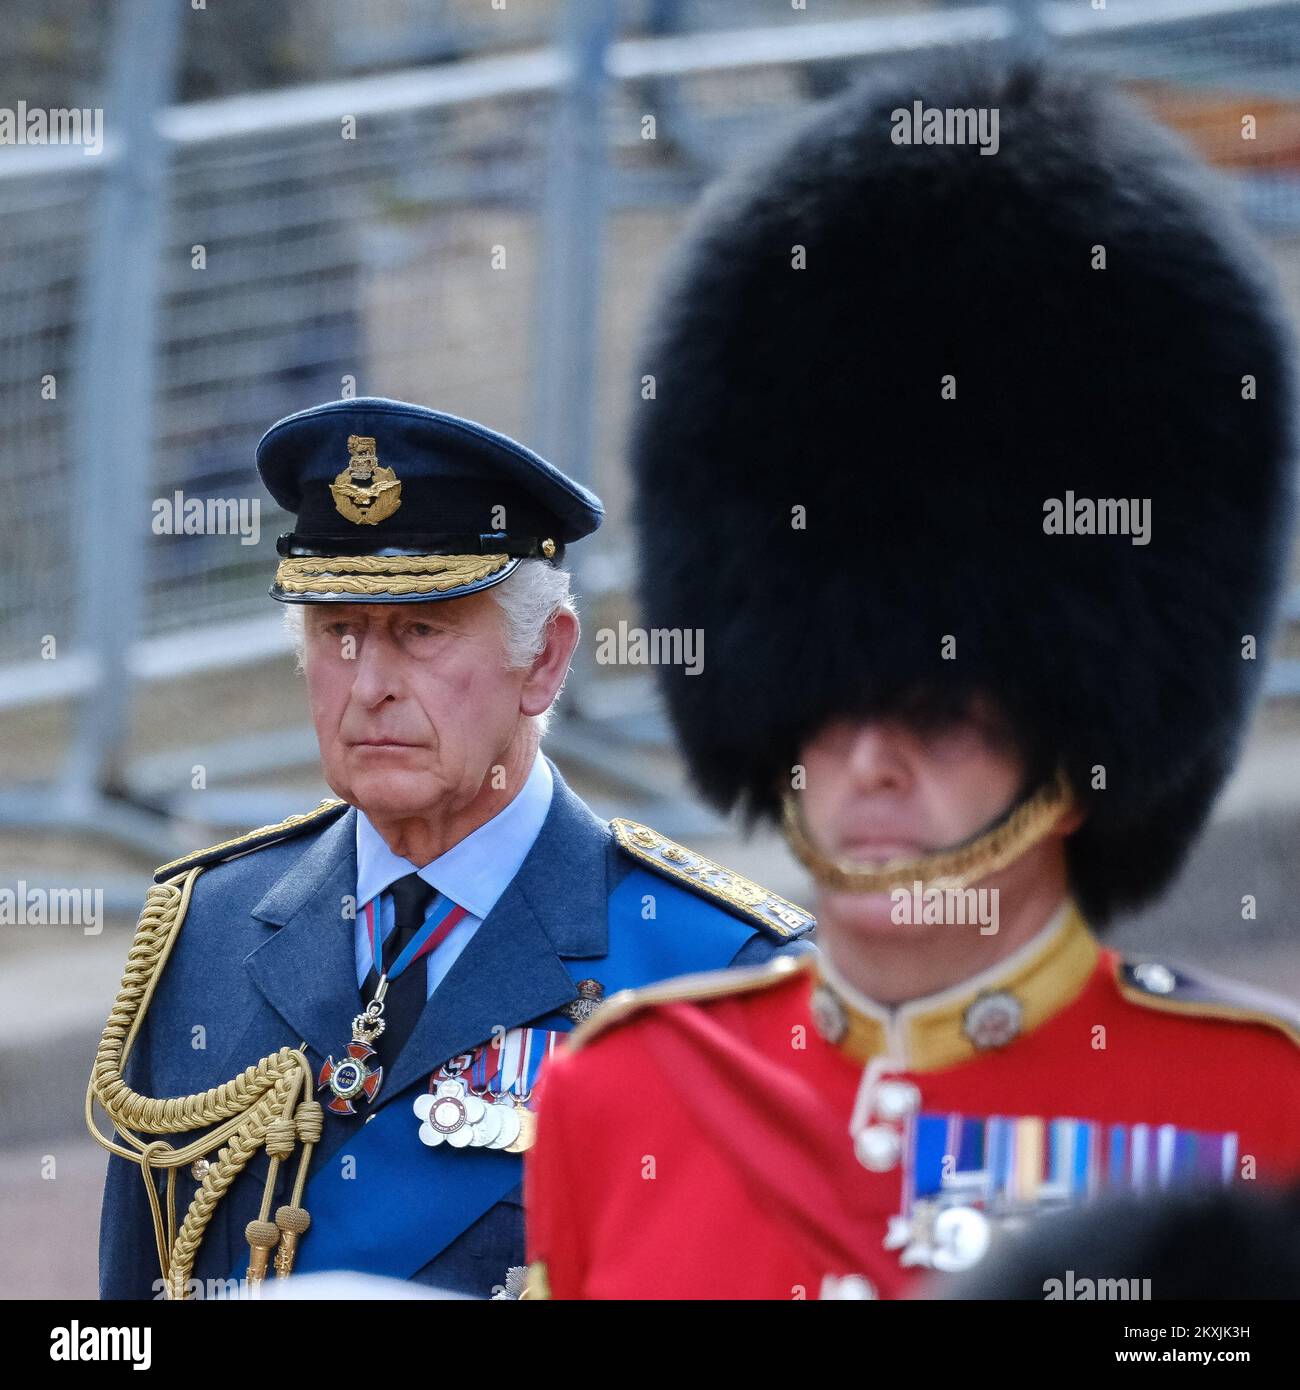 King Charles III walks behind the coffin of his mother, Majesty Queen Elizabeth II photographed during The ceremonial procession to transport her late Majesty Queen Elizabeth II’s coffin from Buckingham Palace to the Palace of Westminster at The Mall , London on Wednesday 14 September 2022 . Picture by Julie Edwards. Stock Photo